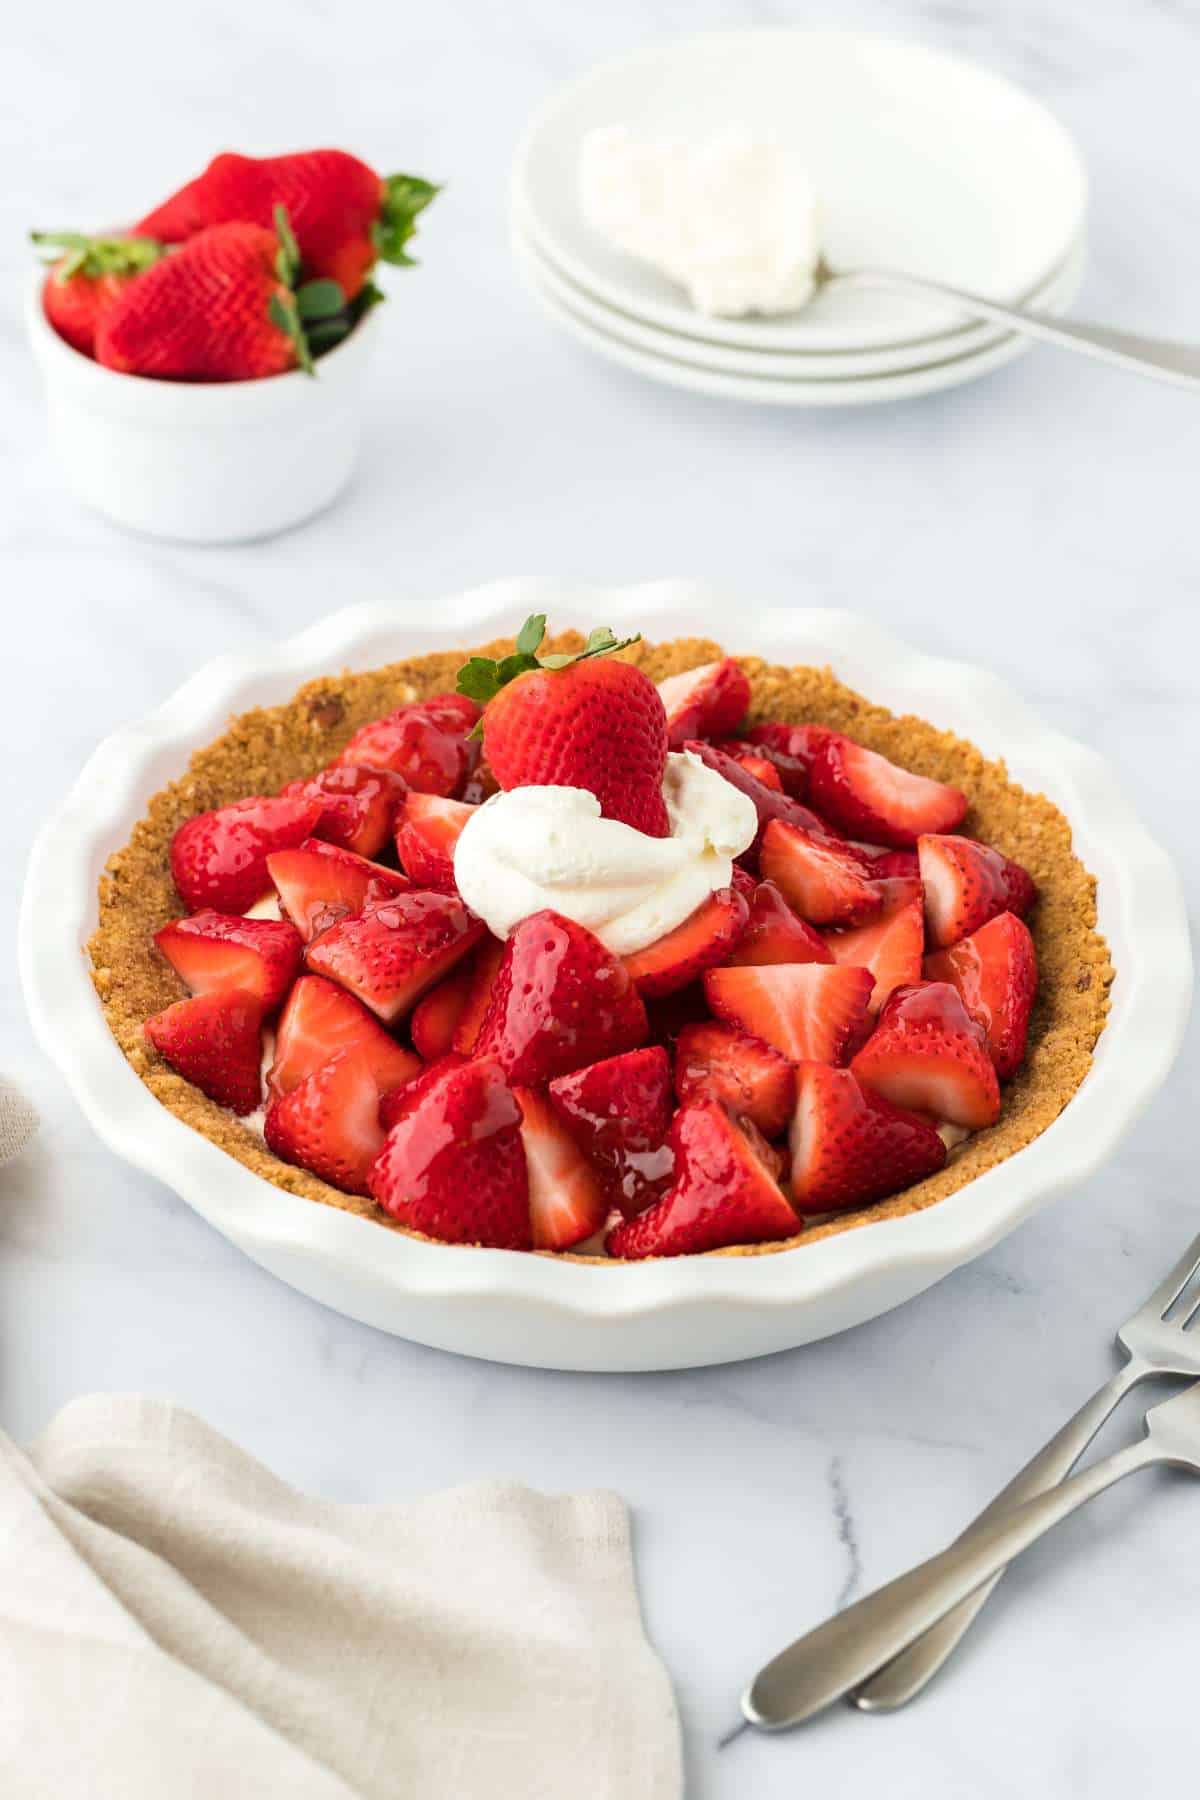 Strawberry custard pie on a table with a bowl of strawberries and a stack of plates in the background.